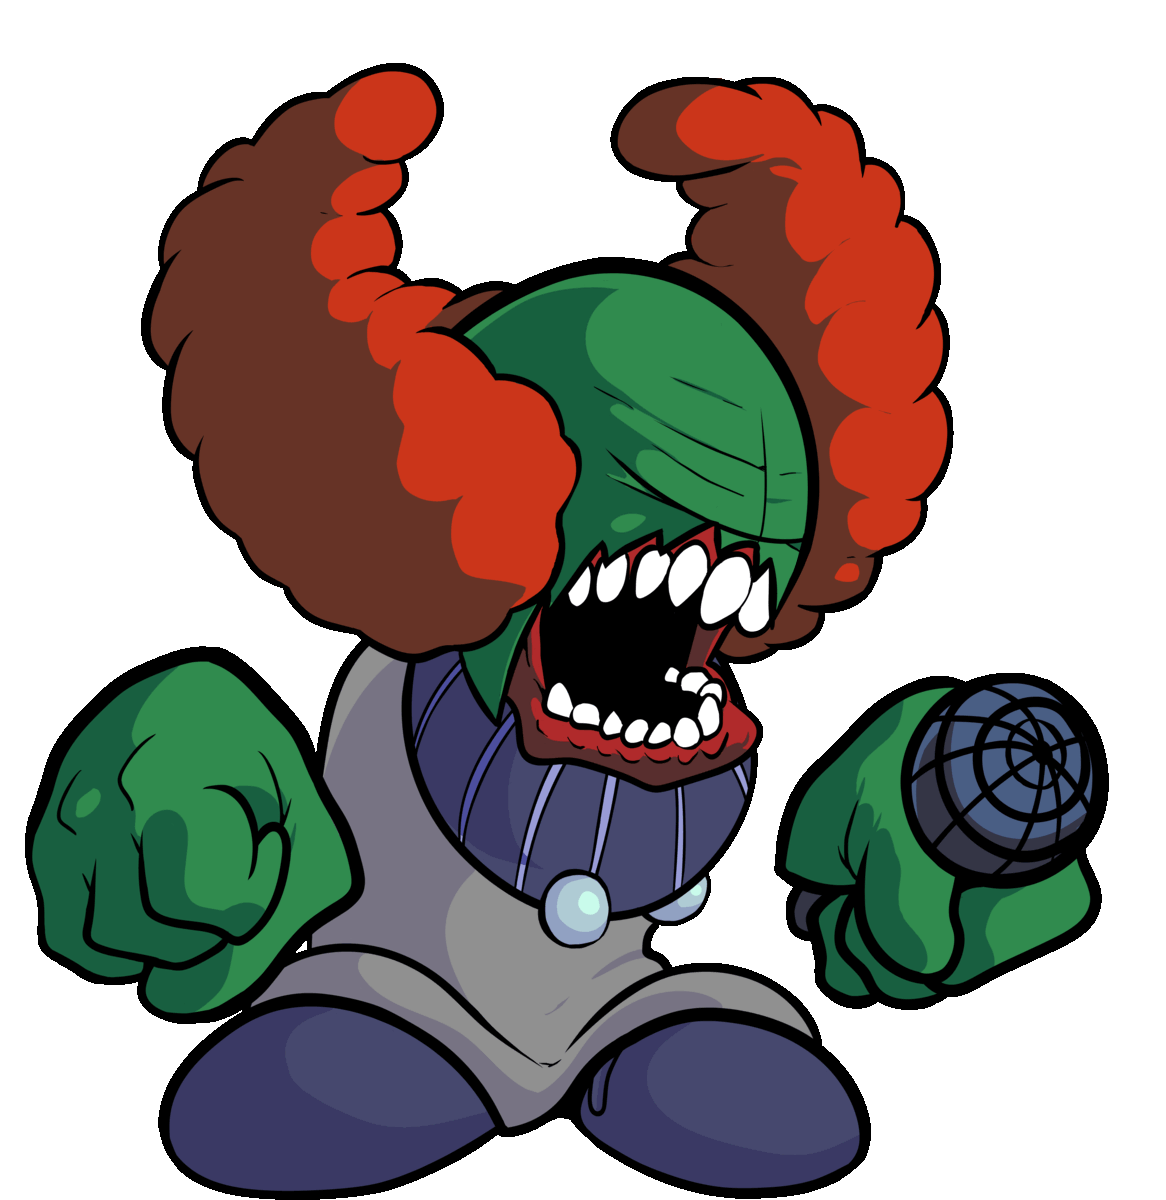 Tricky the clown